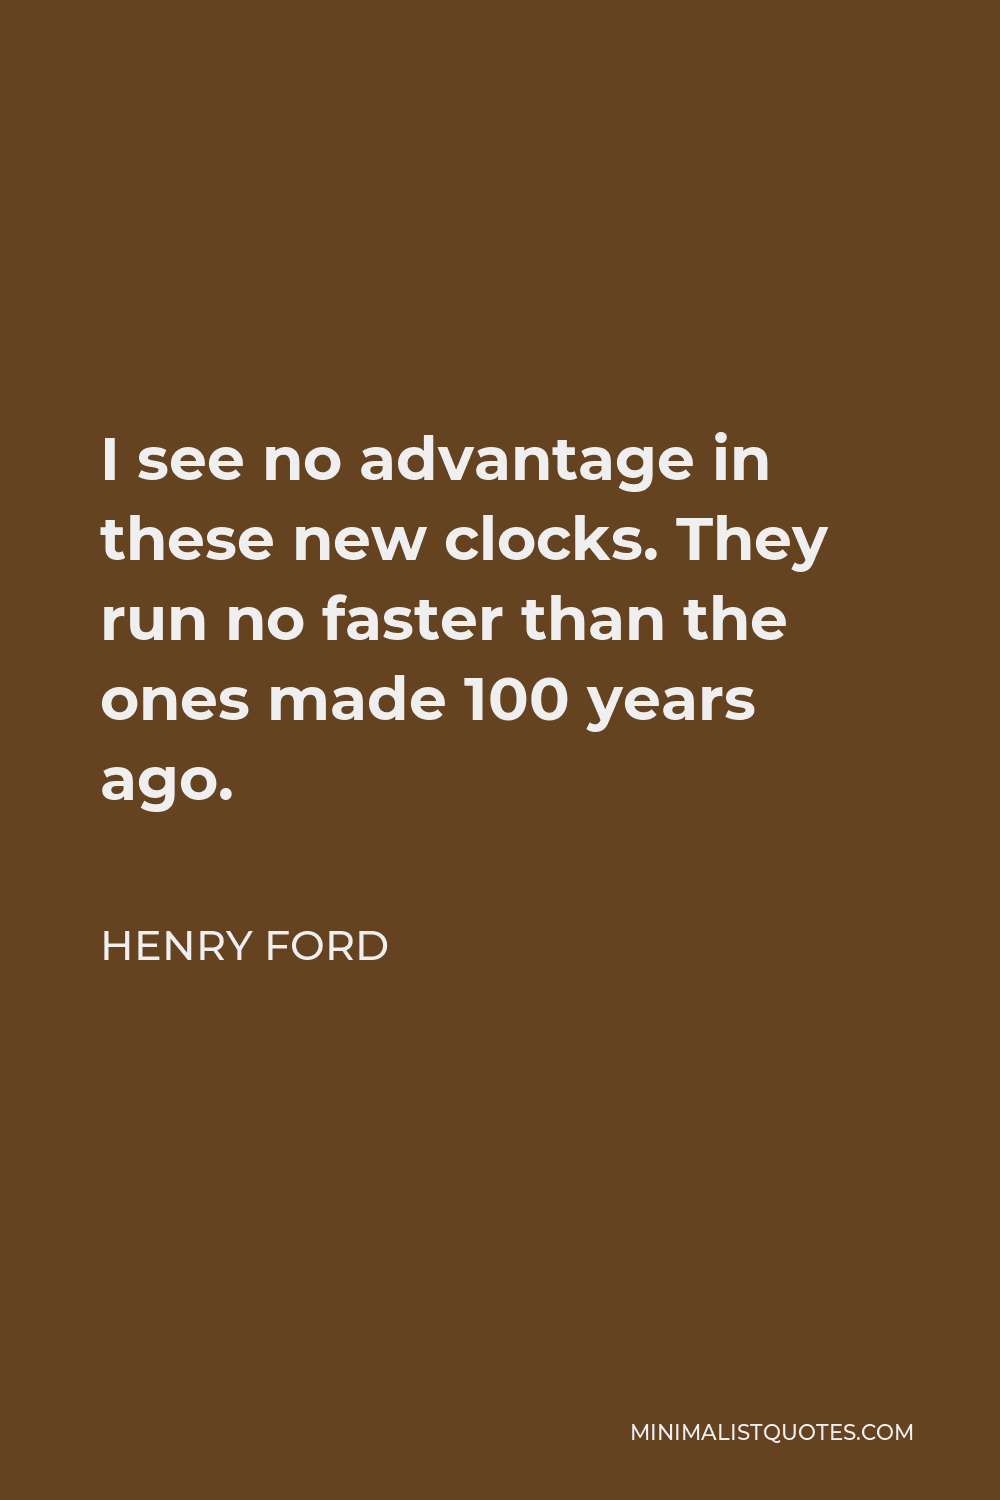 Henry Ford Quote - I see no advantage in these new clocks. They run no faster than the ones made 100 years ago.